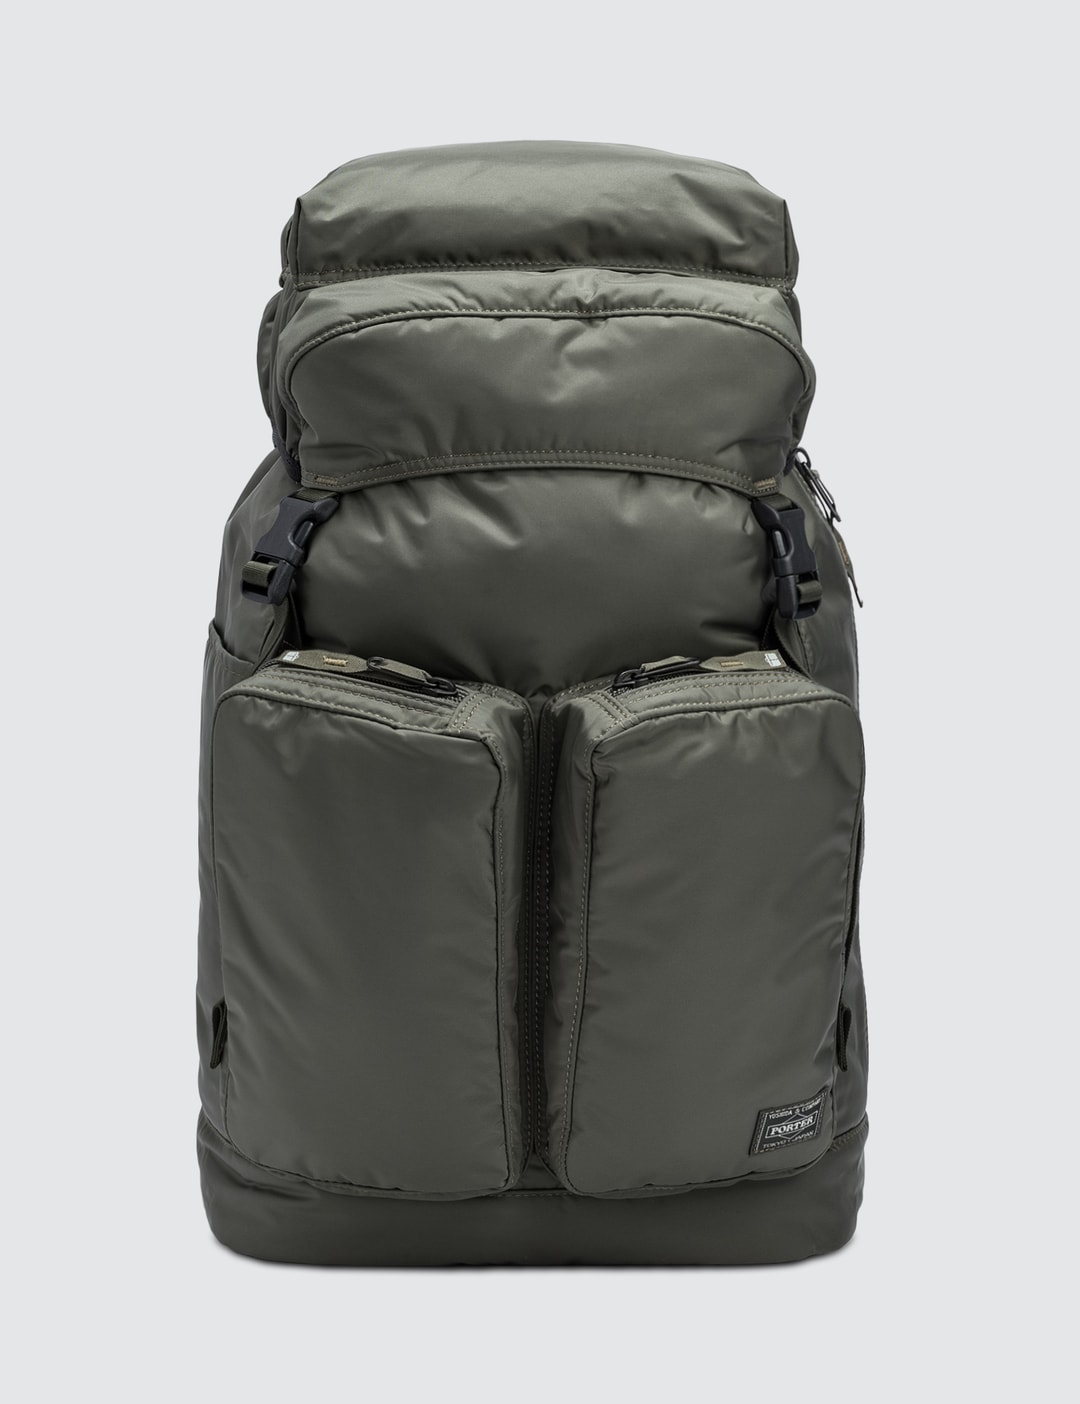 Head Porter - Olive Drab Ricksack | HBX - Globally Curated Fashion and ...